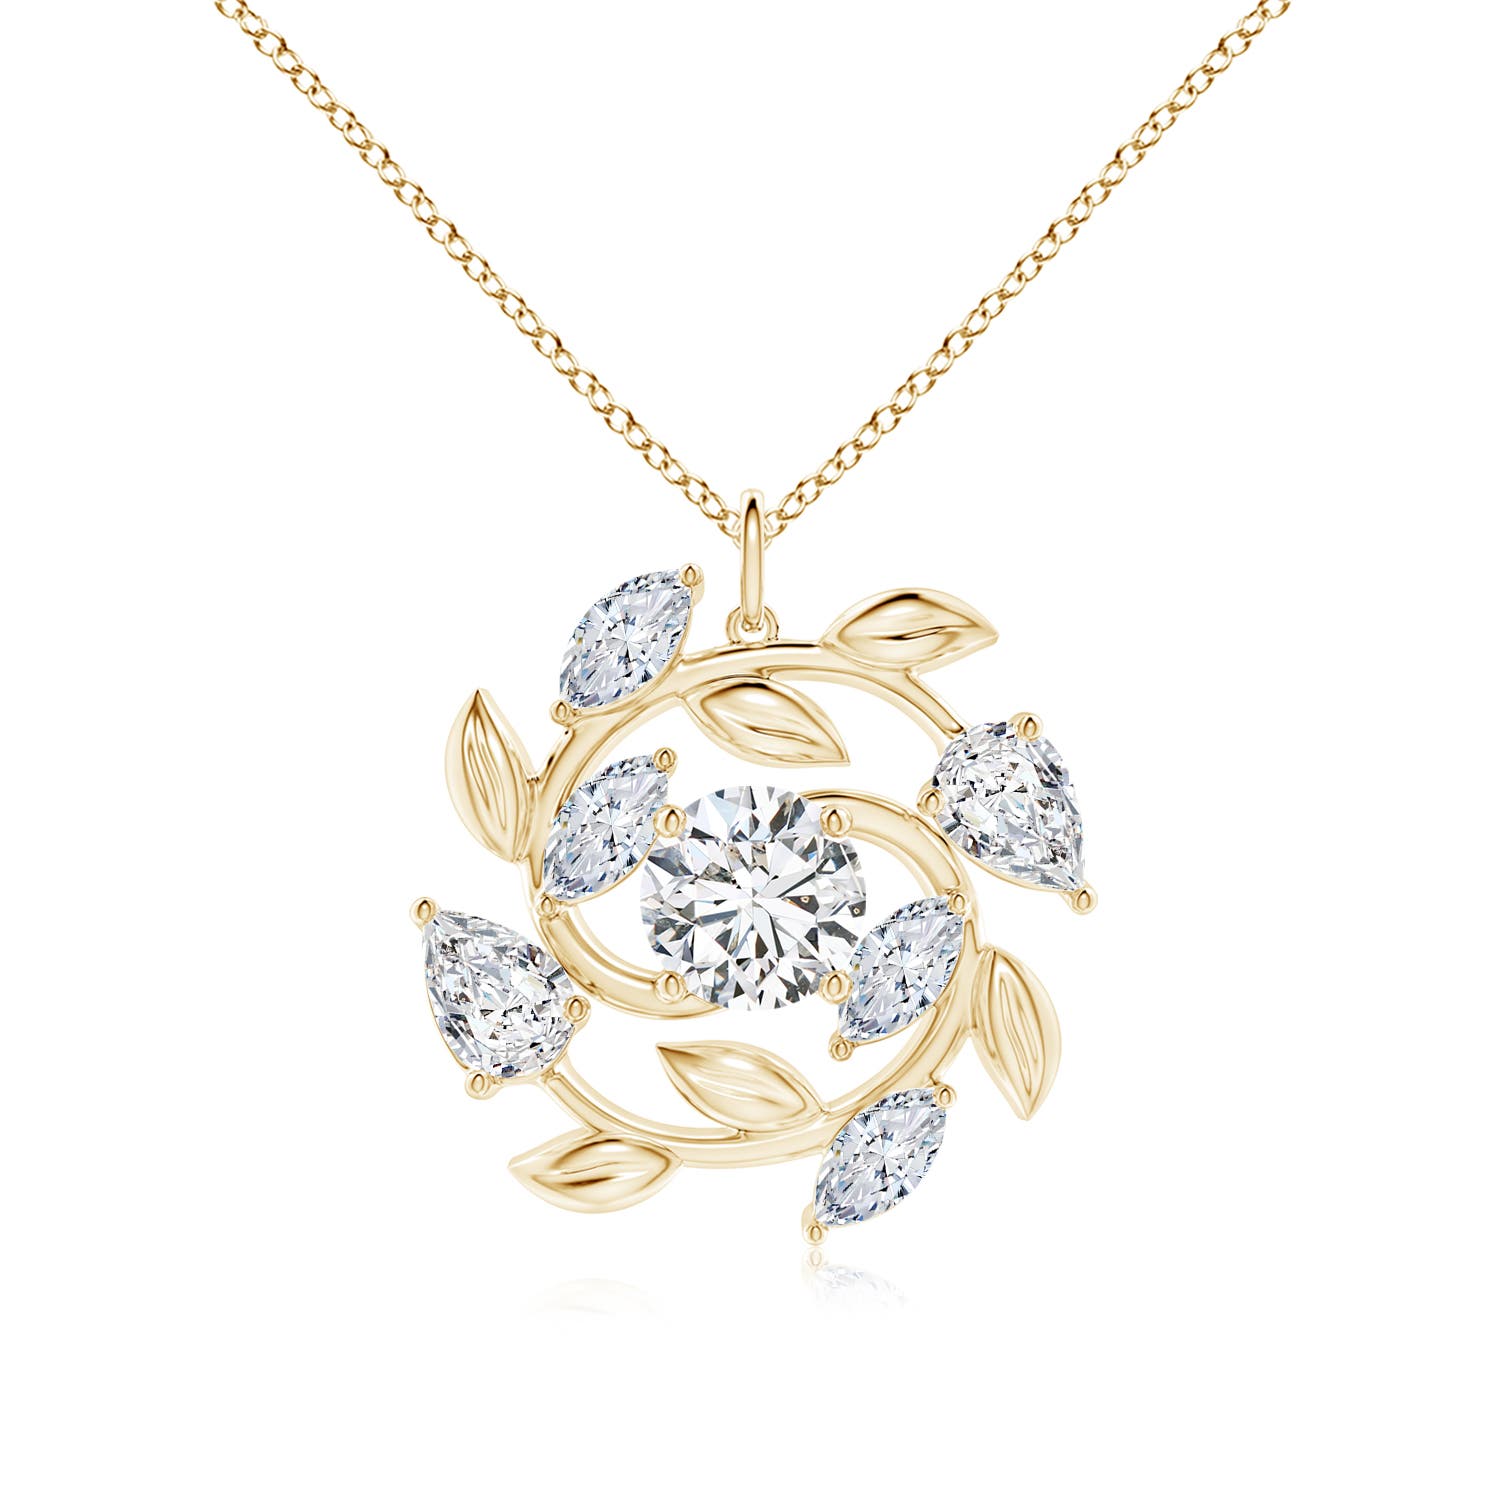 H, SI2 / 4.62 CT / 18 KT Yellow Gold